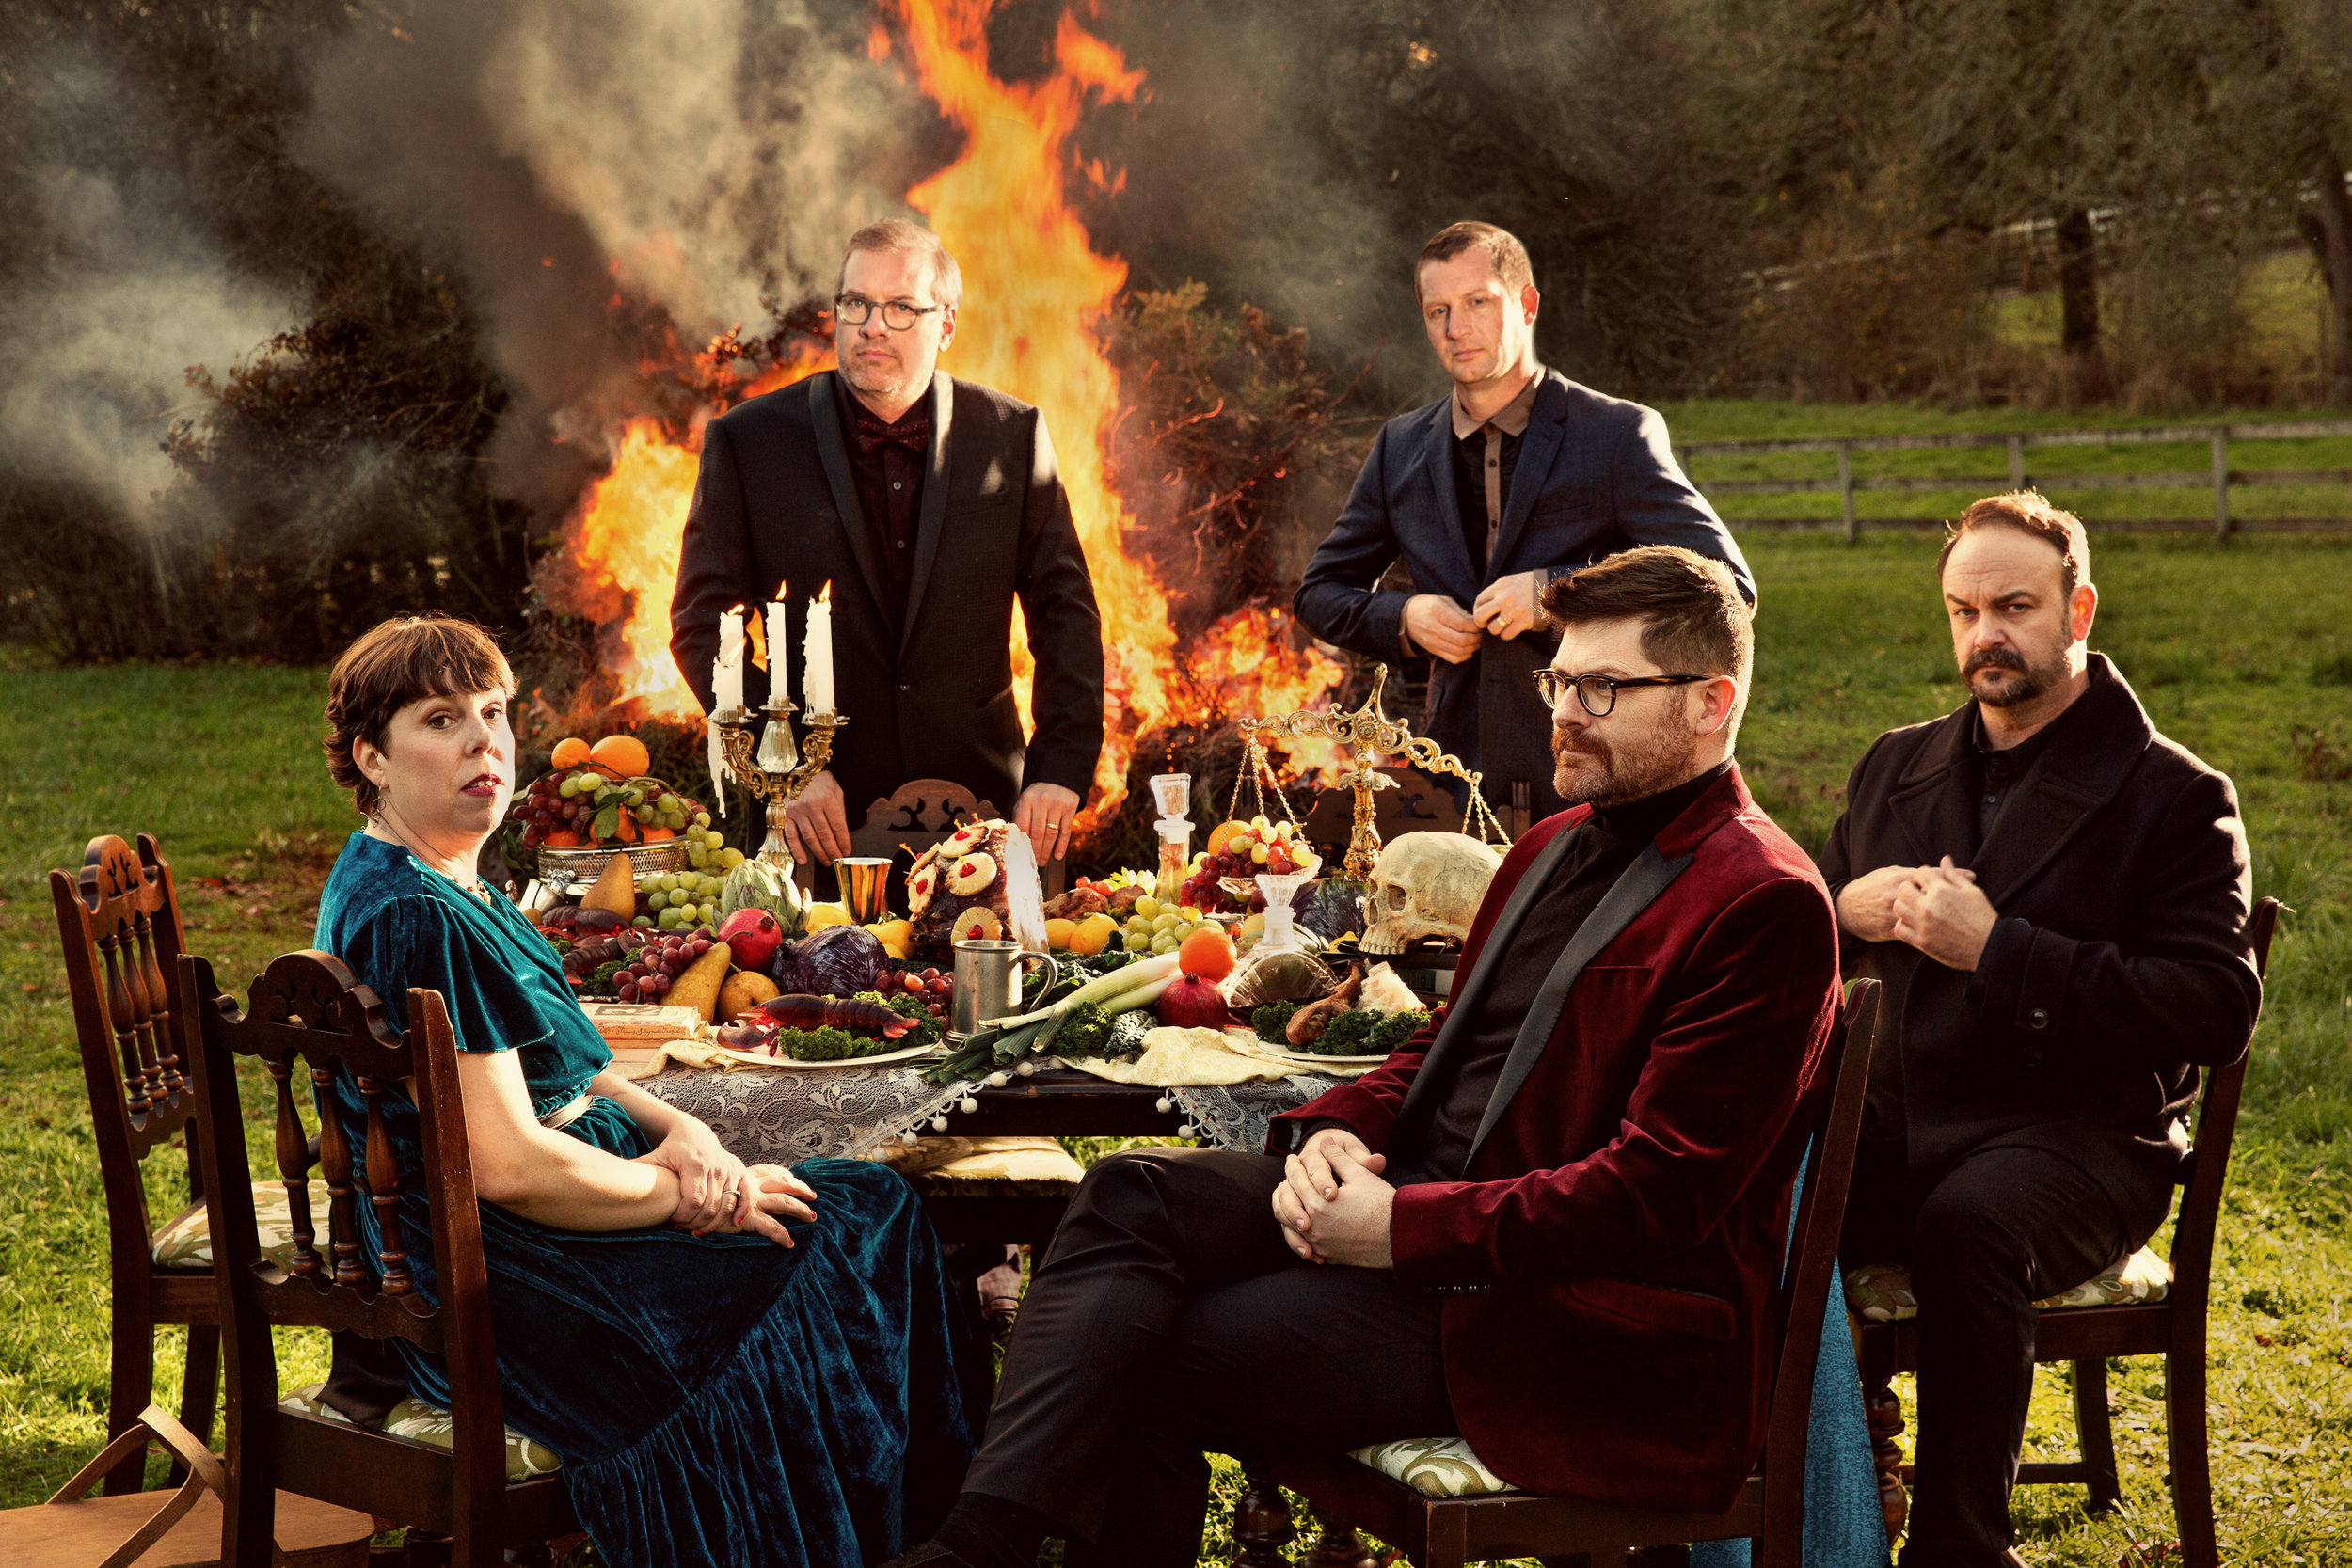 HA_171204_The Decemberists_Andres_Dinner Party_1_FINAL.jpg